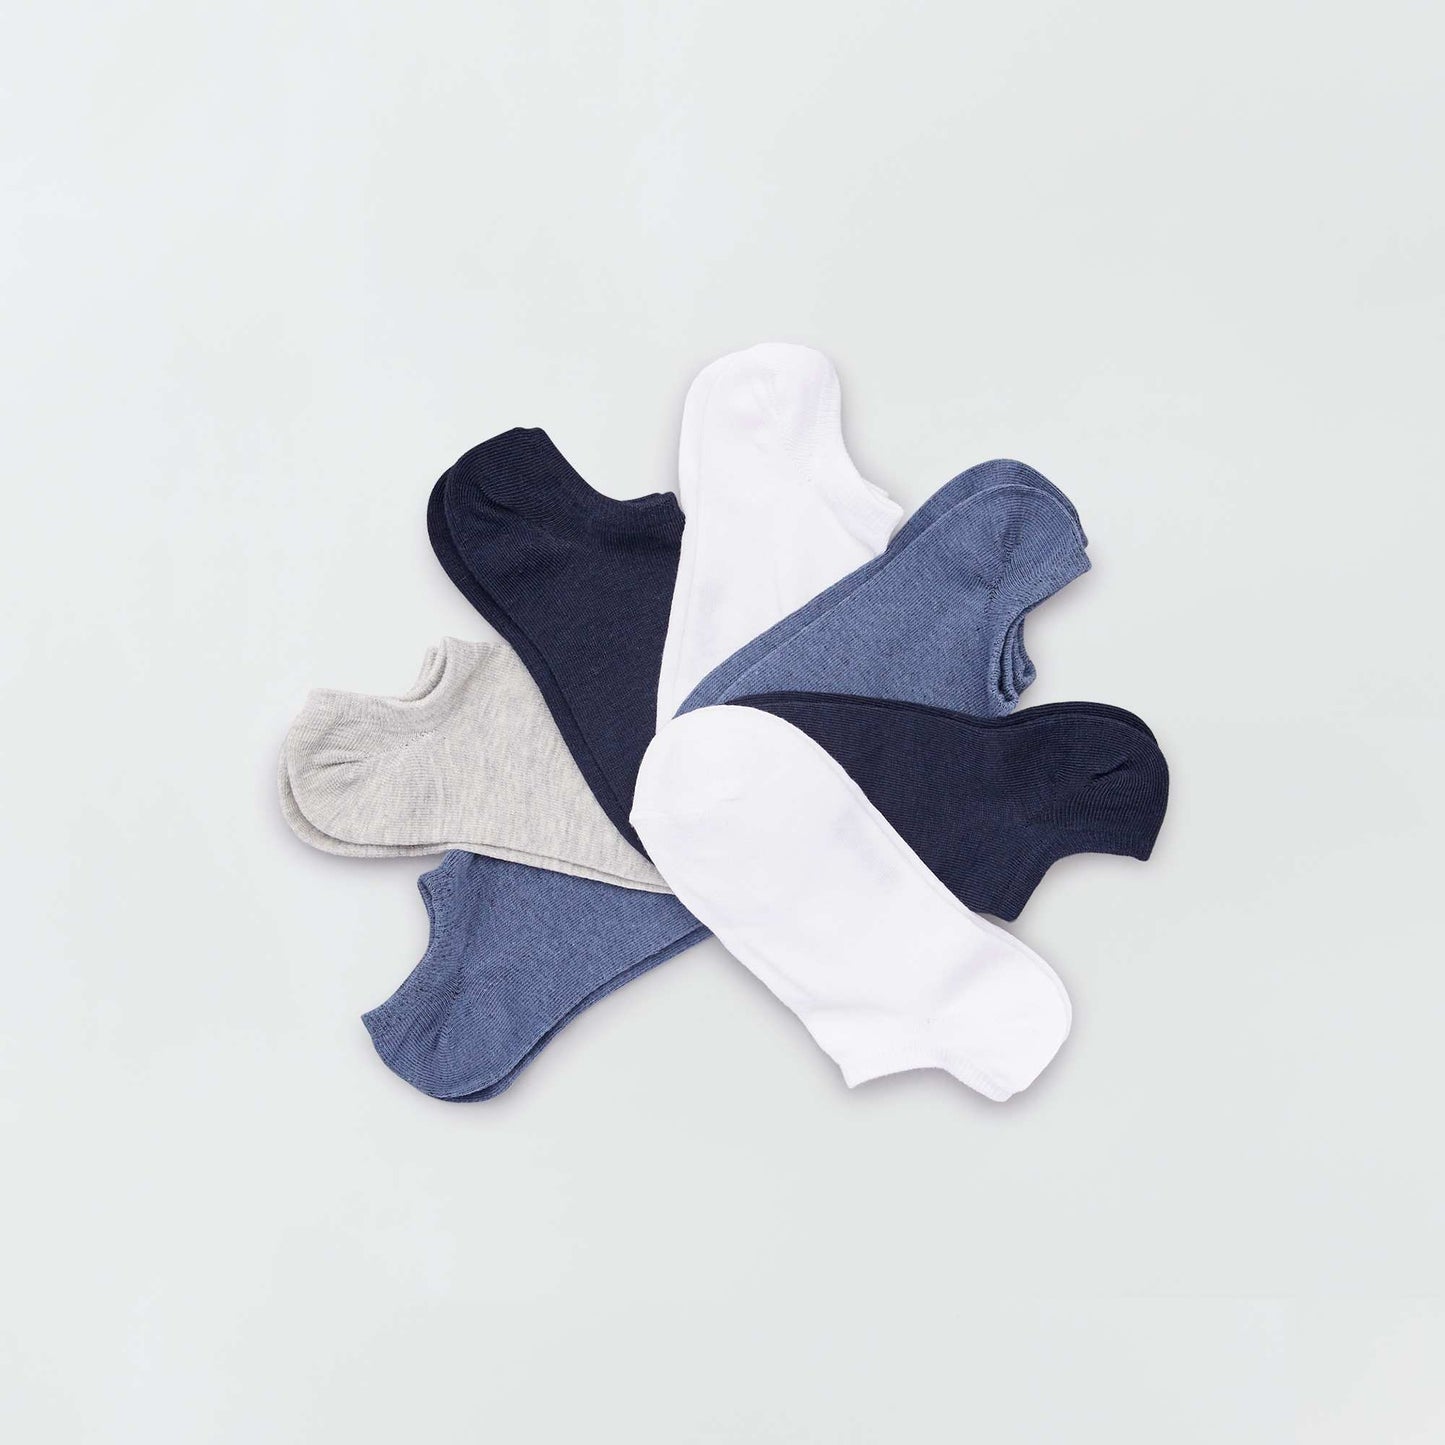 Pack of 7 pairs of trainer socks BLUE